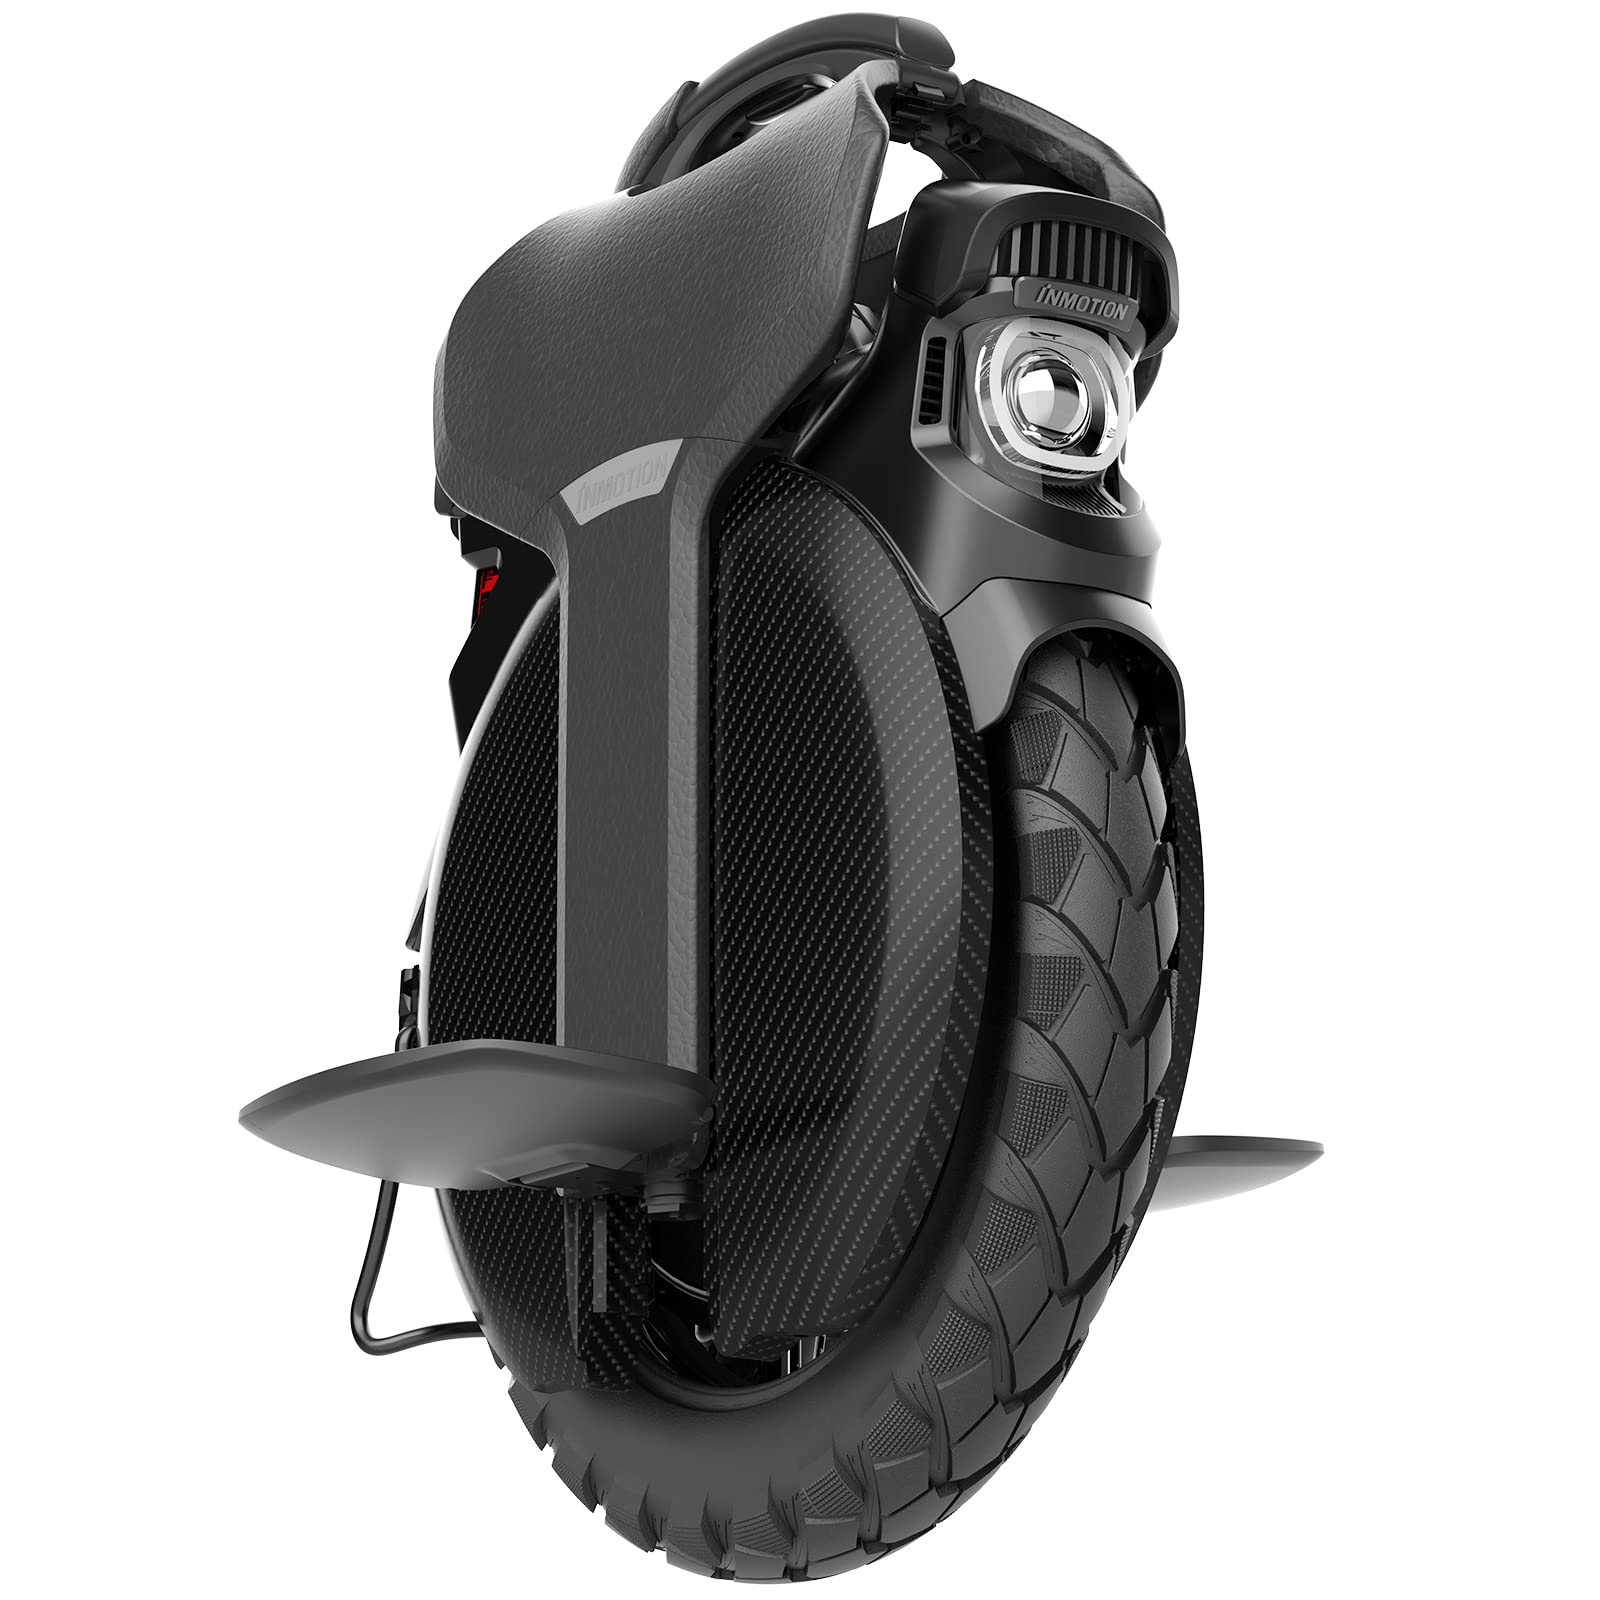 INMOTION V11 Electric Unicycle Review: The Ultimate Self-Balancing Monowheel